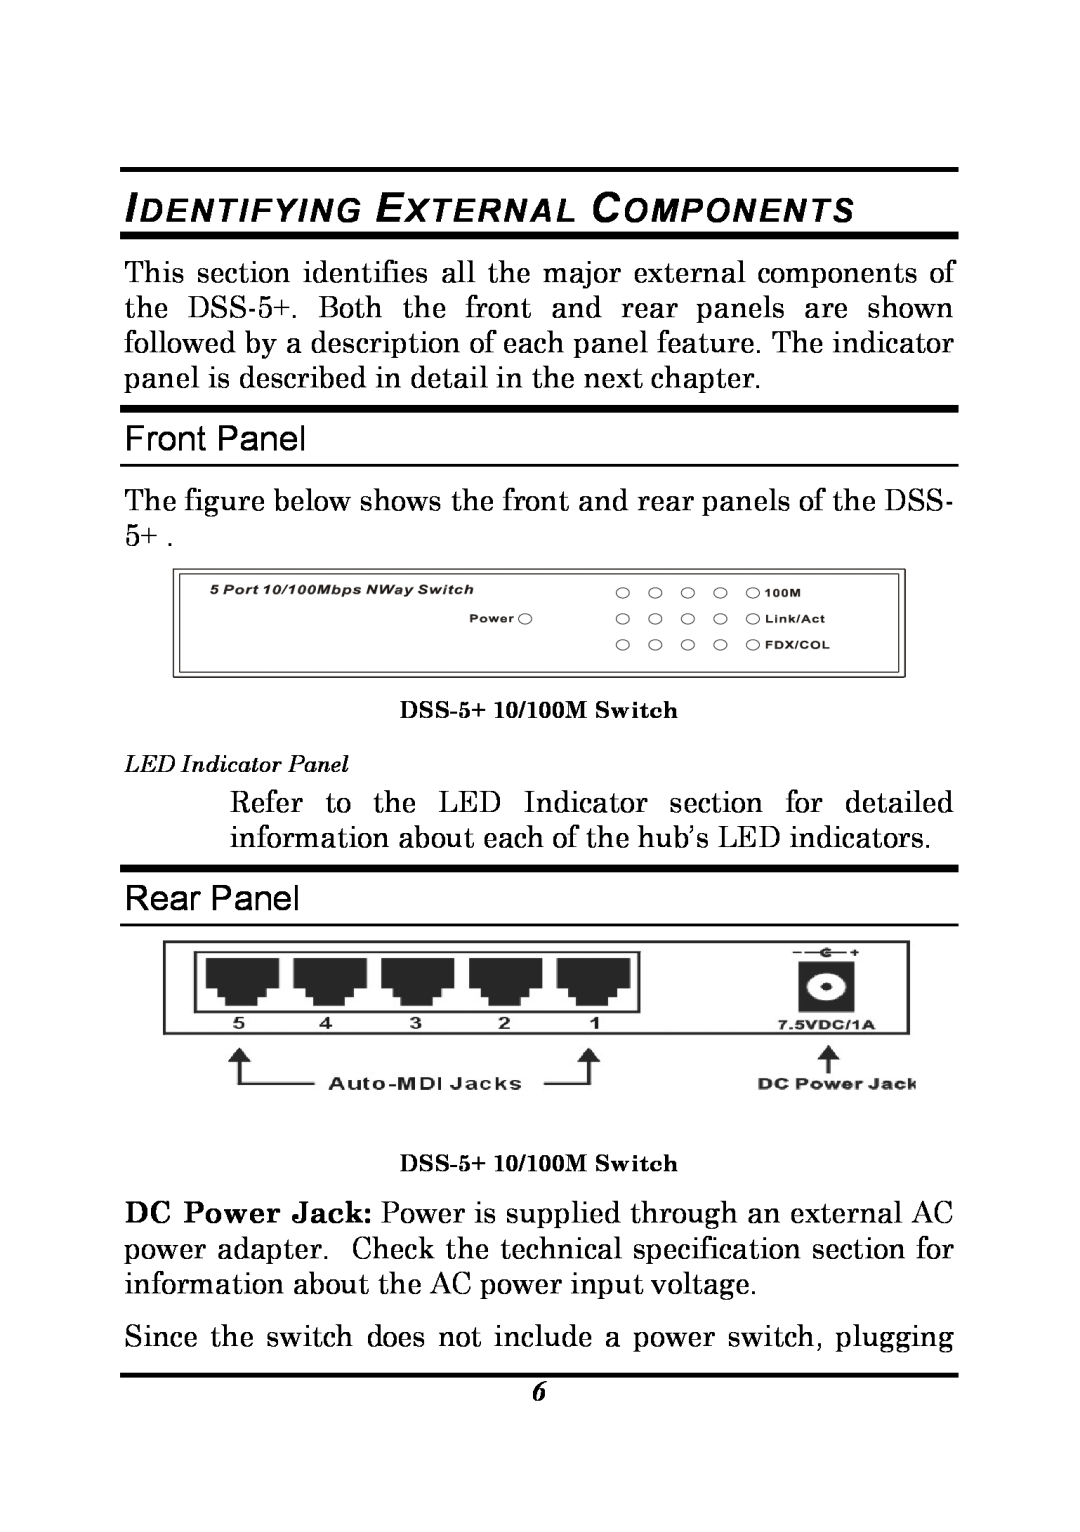 D-Link DSS-5 manual Front Panel, Rear Panel, Identifying External Components 